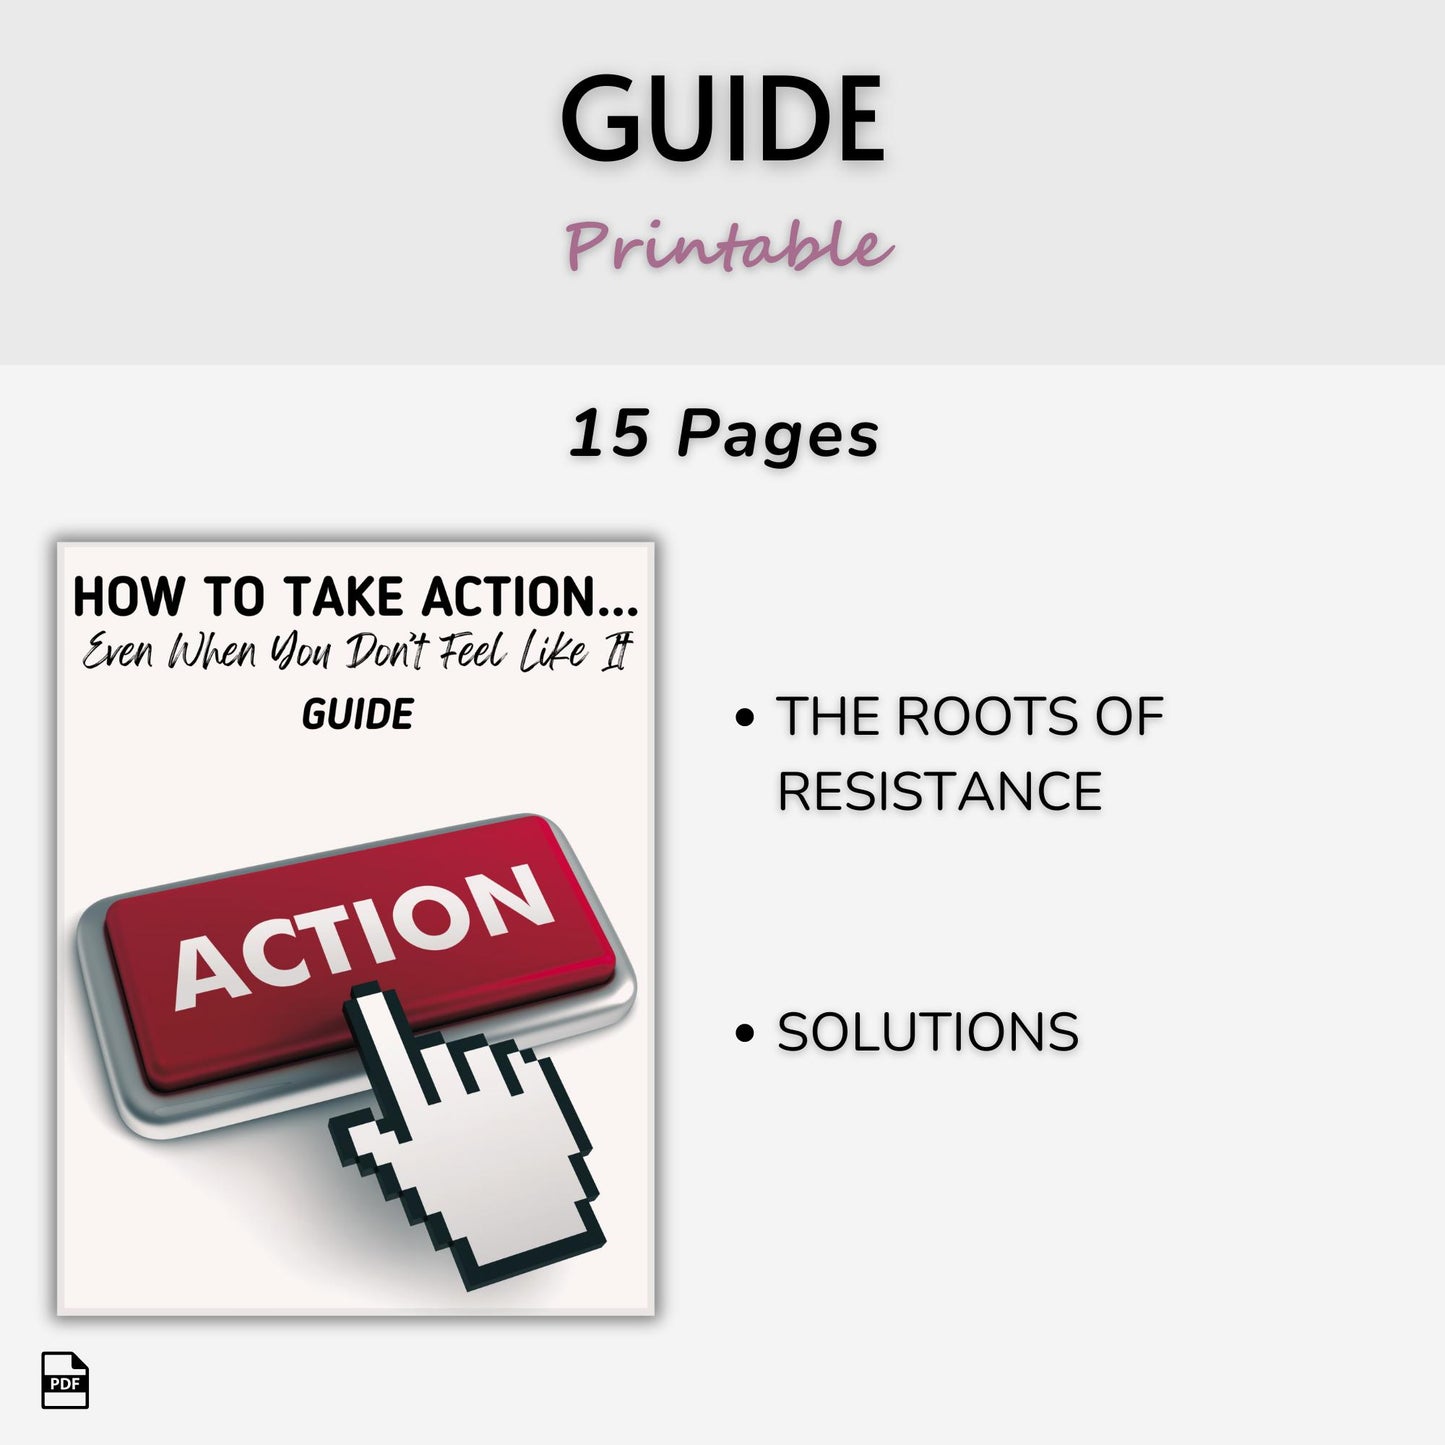 How To Take Action...